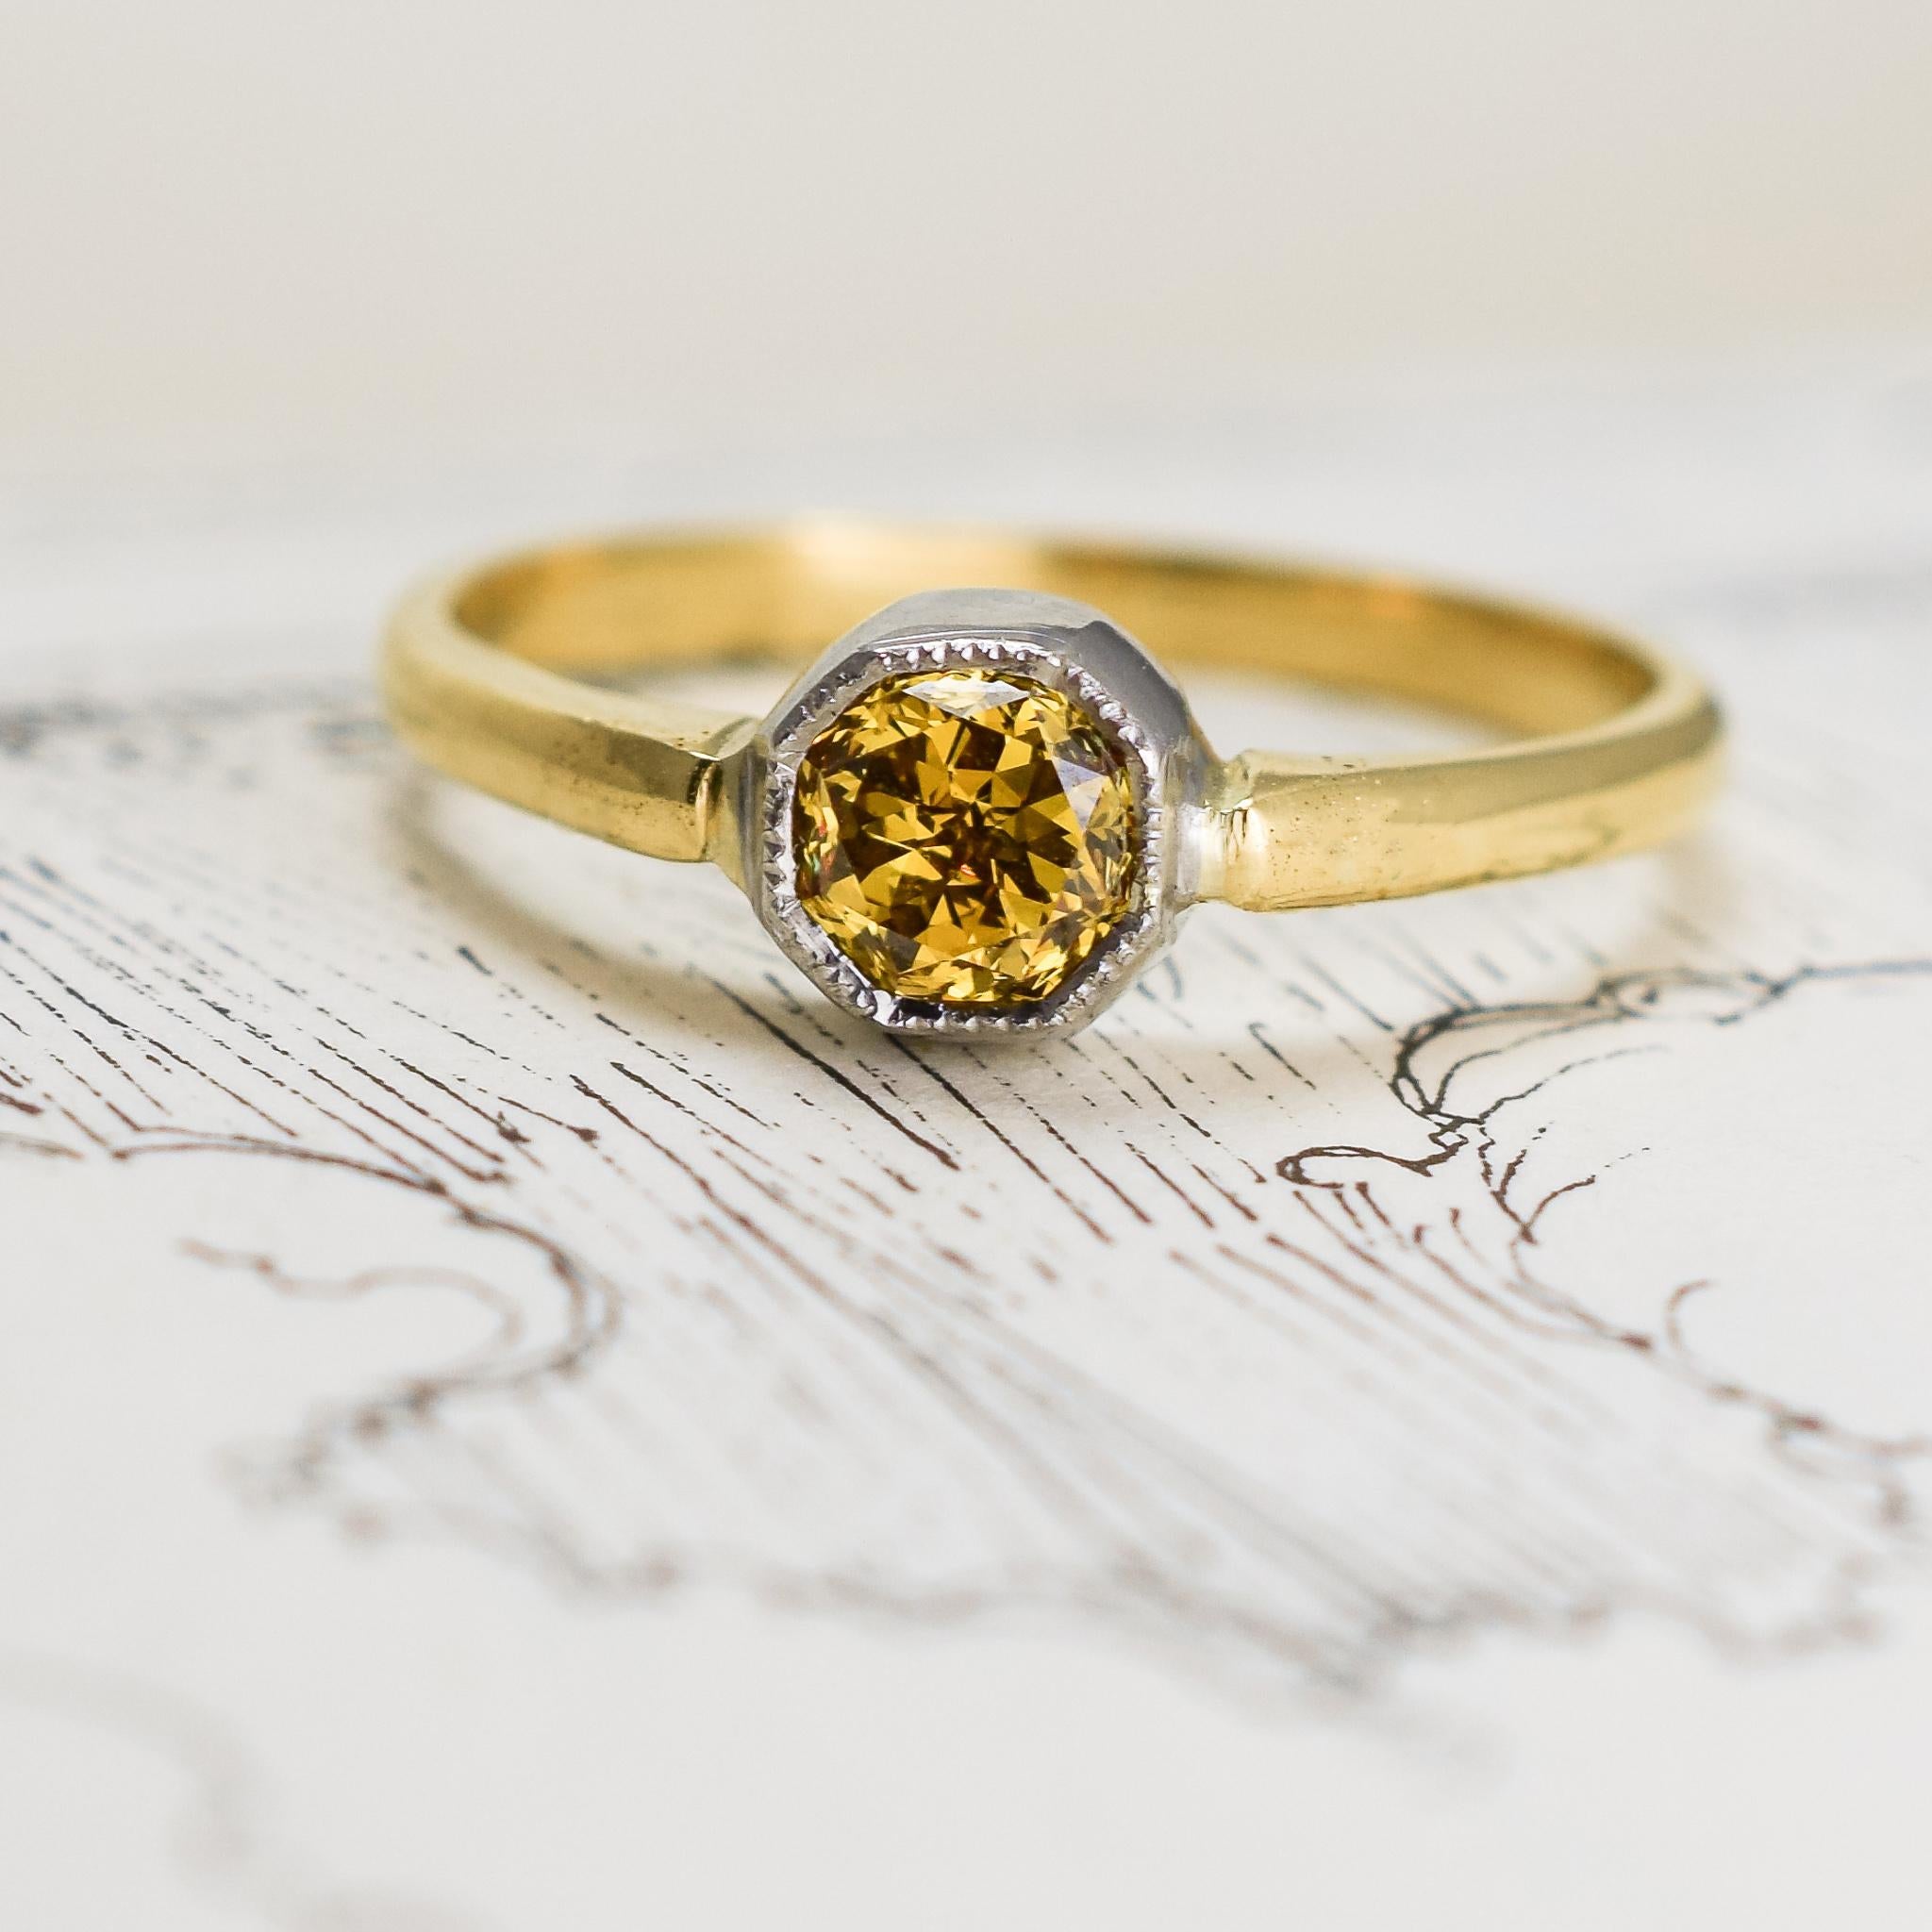 BL Bespoke 0.56 Carat Fancy Intense Orangish-Yellow Diamond Solitaire Ring In New Condition For Sale In Sale, Cheshire